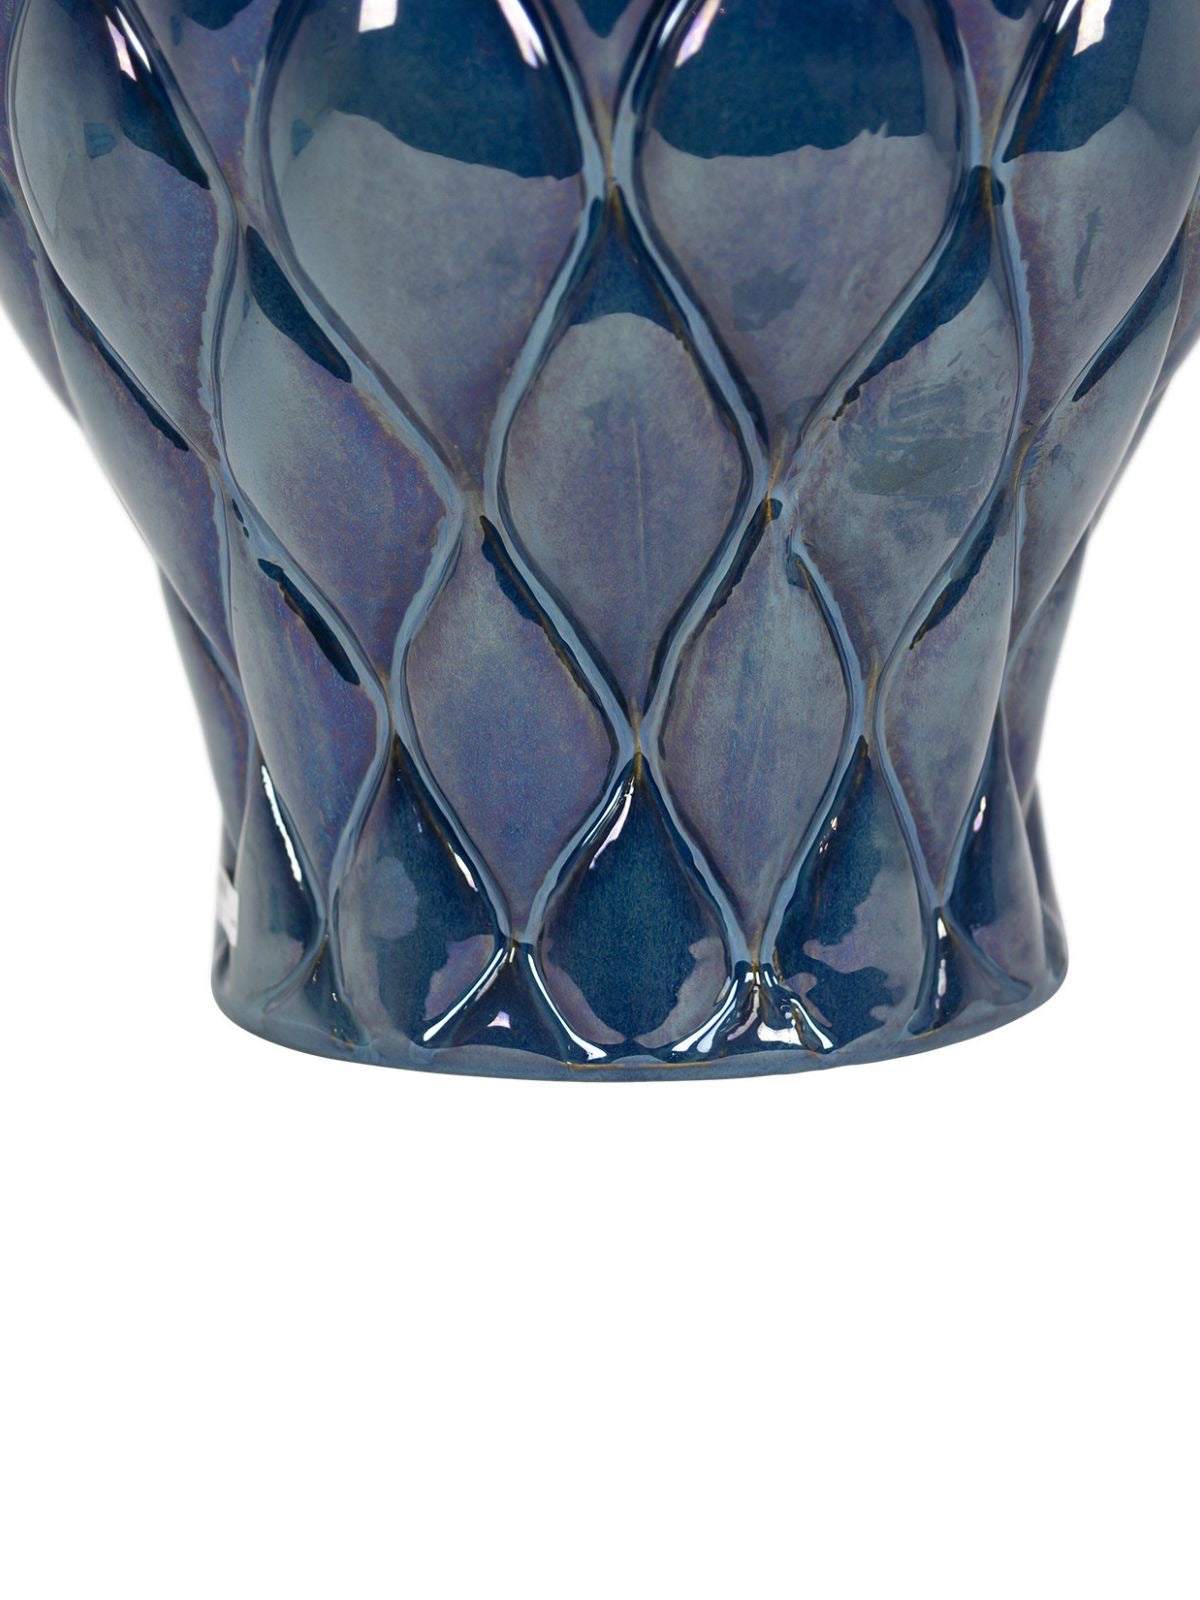 Sapphire Blue Ceramic Ginger Jar with Quilt Pattern on Base, Sold KYA Home Decor.